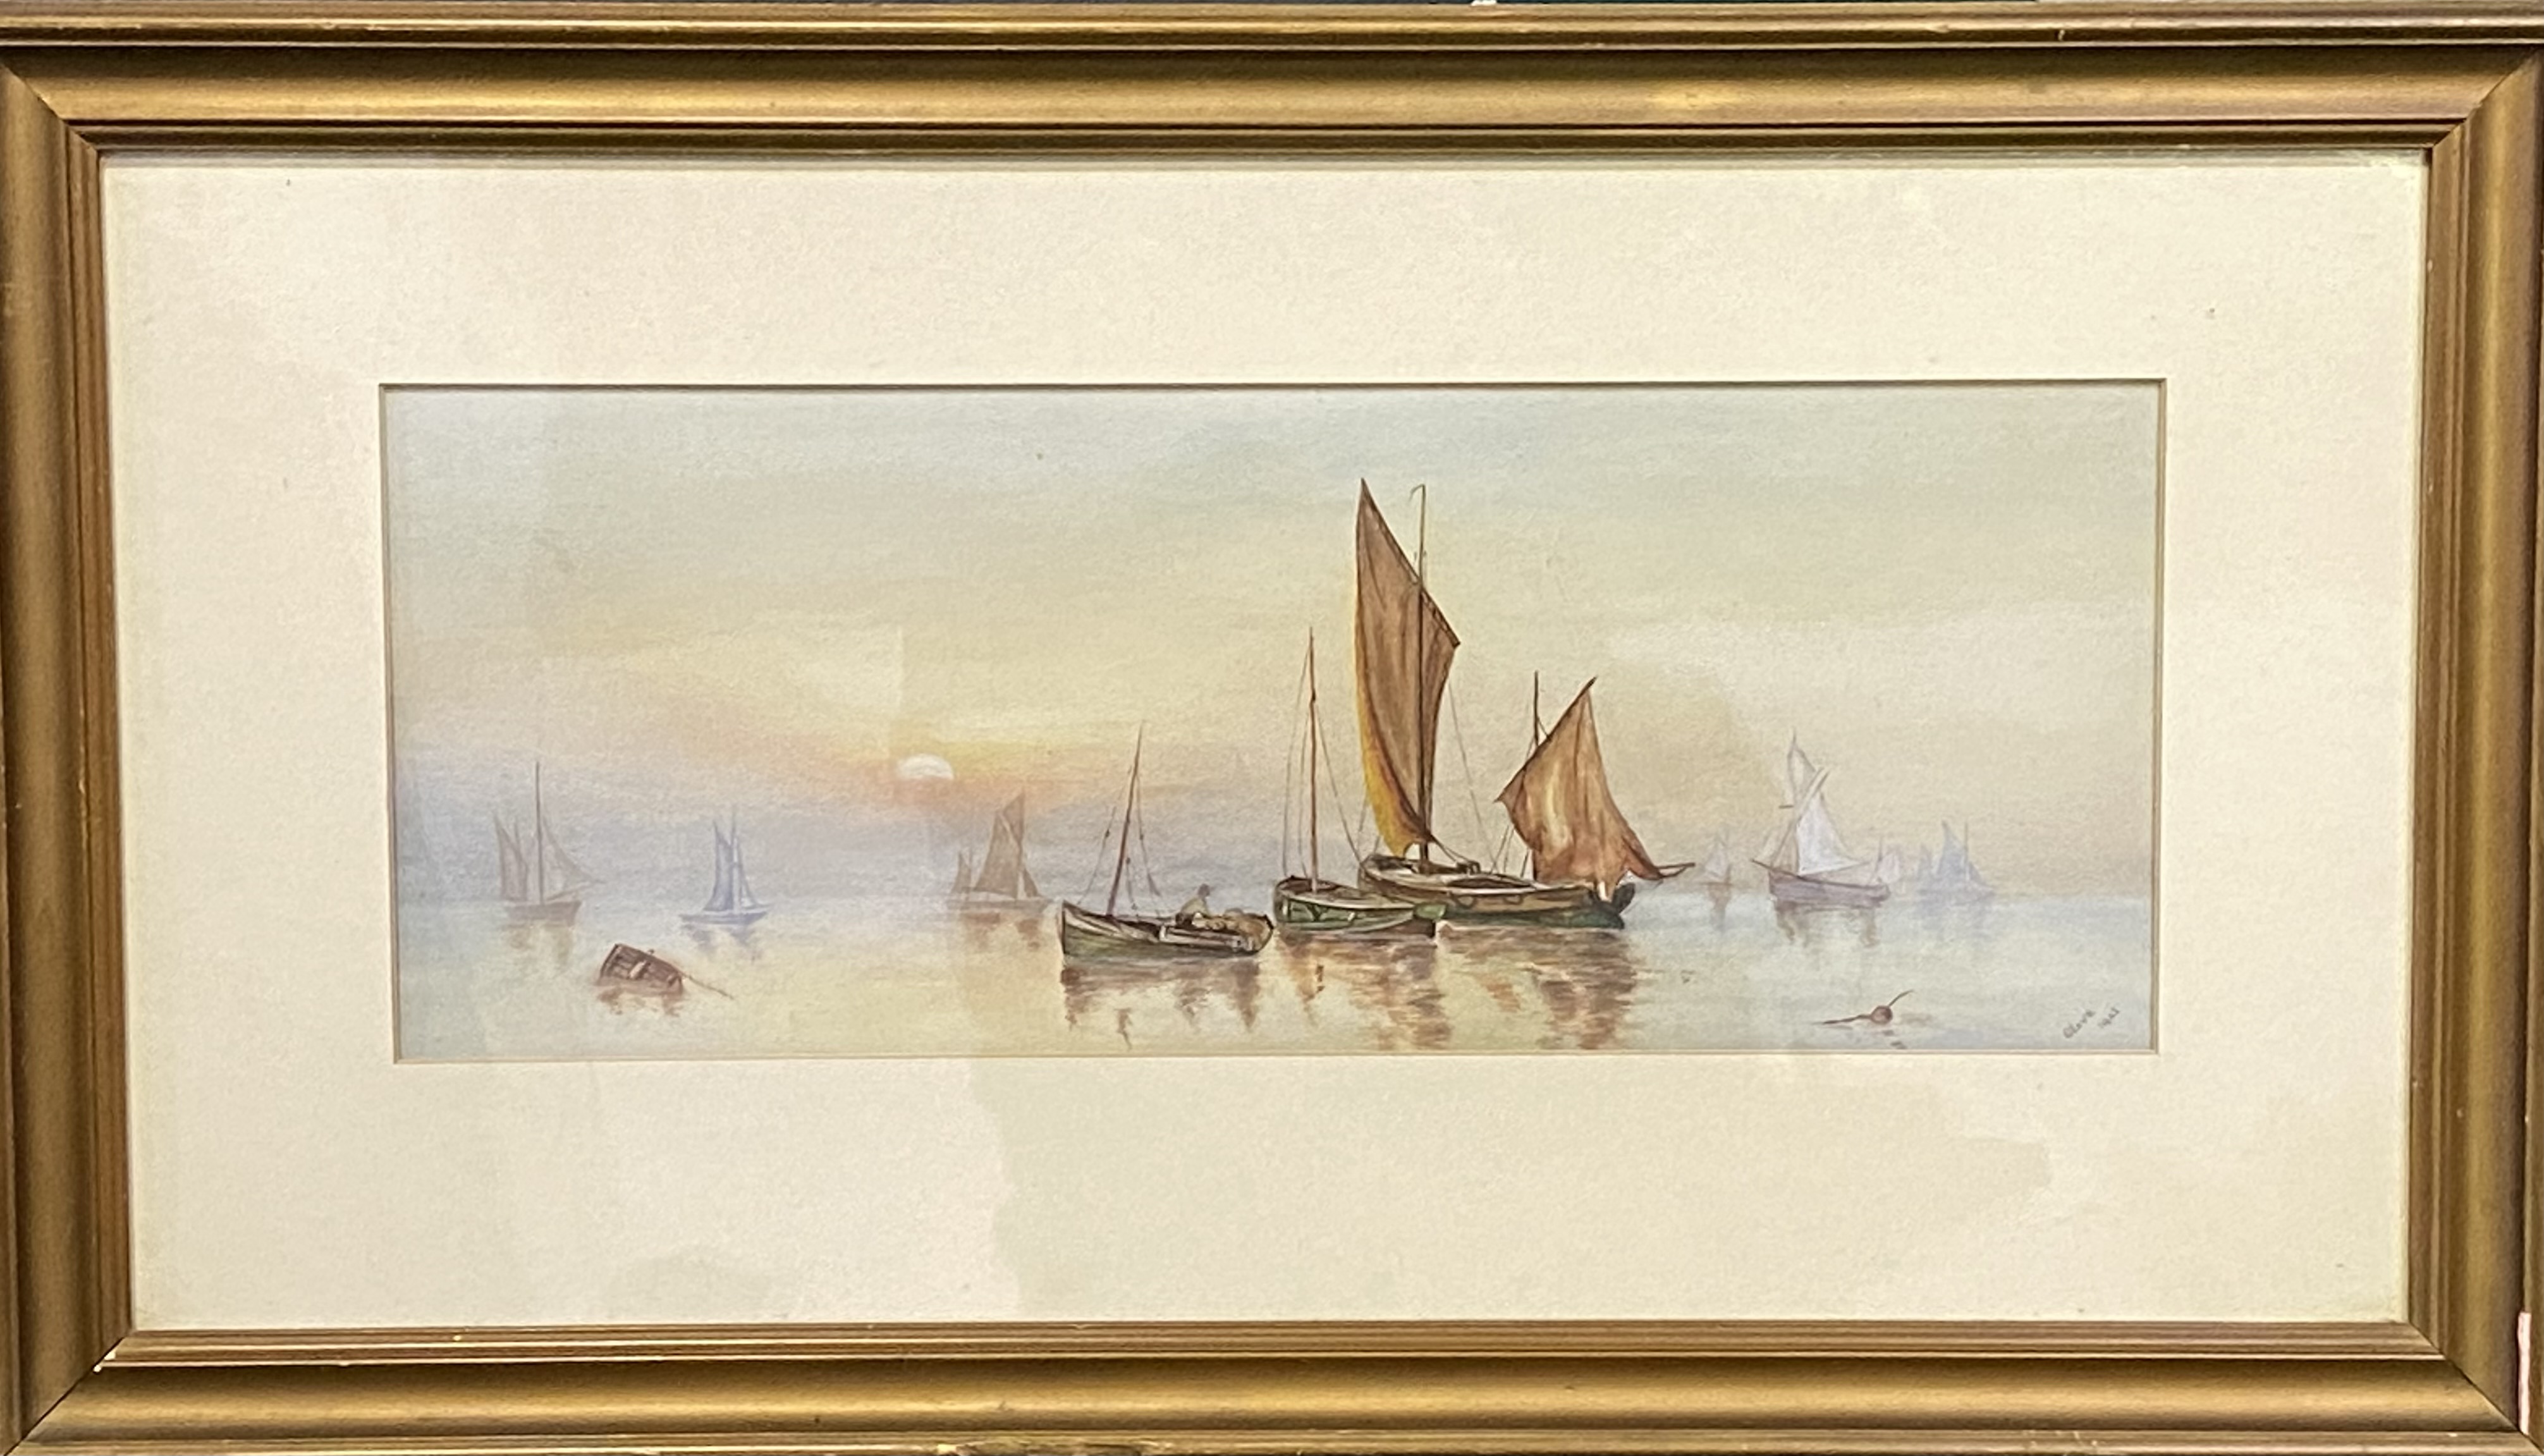 Framed and glazed watercolour of moored boats